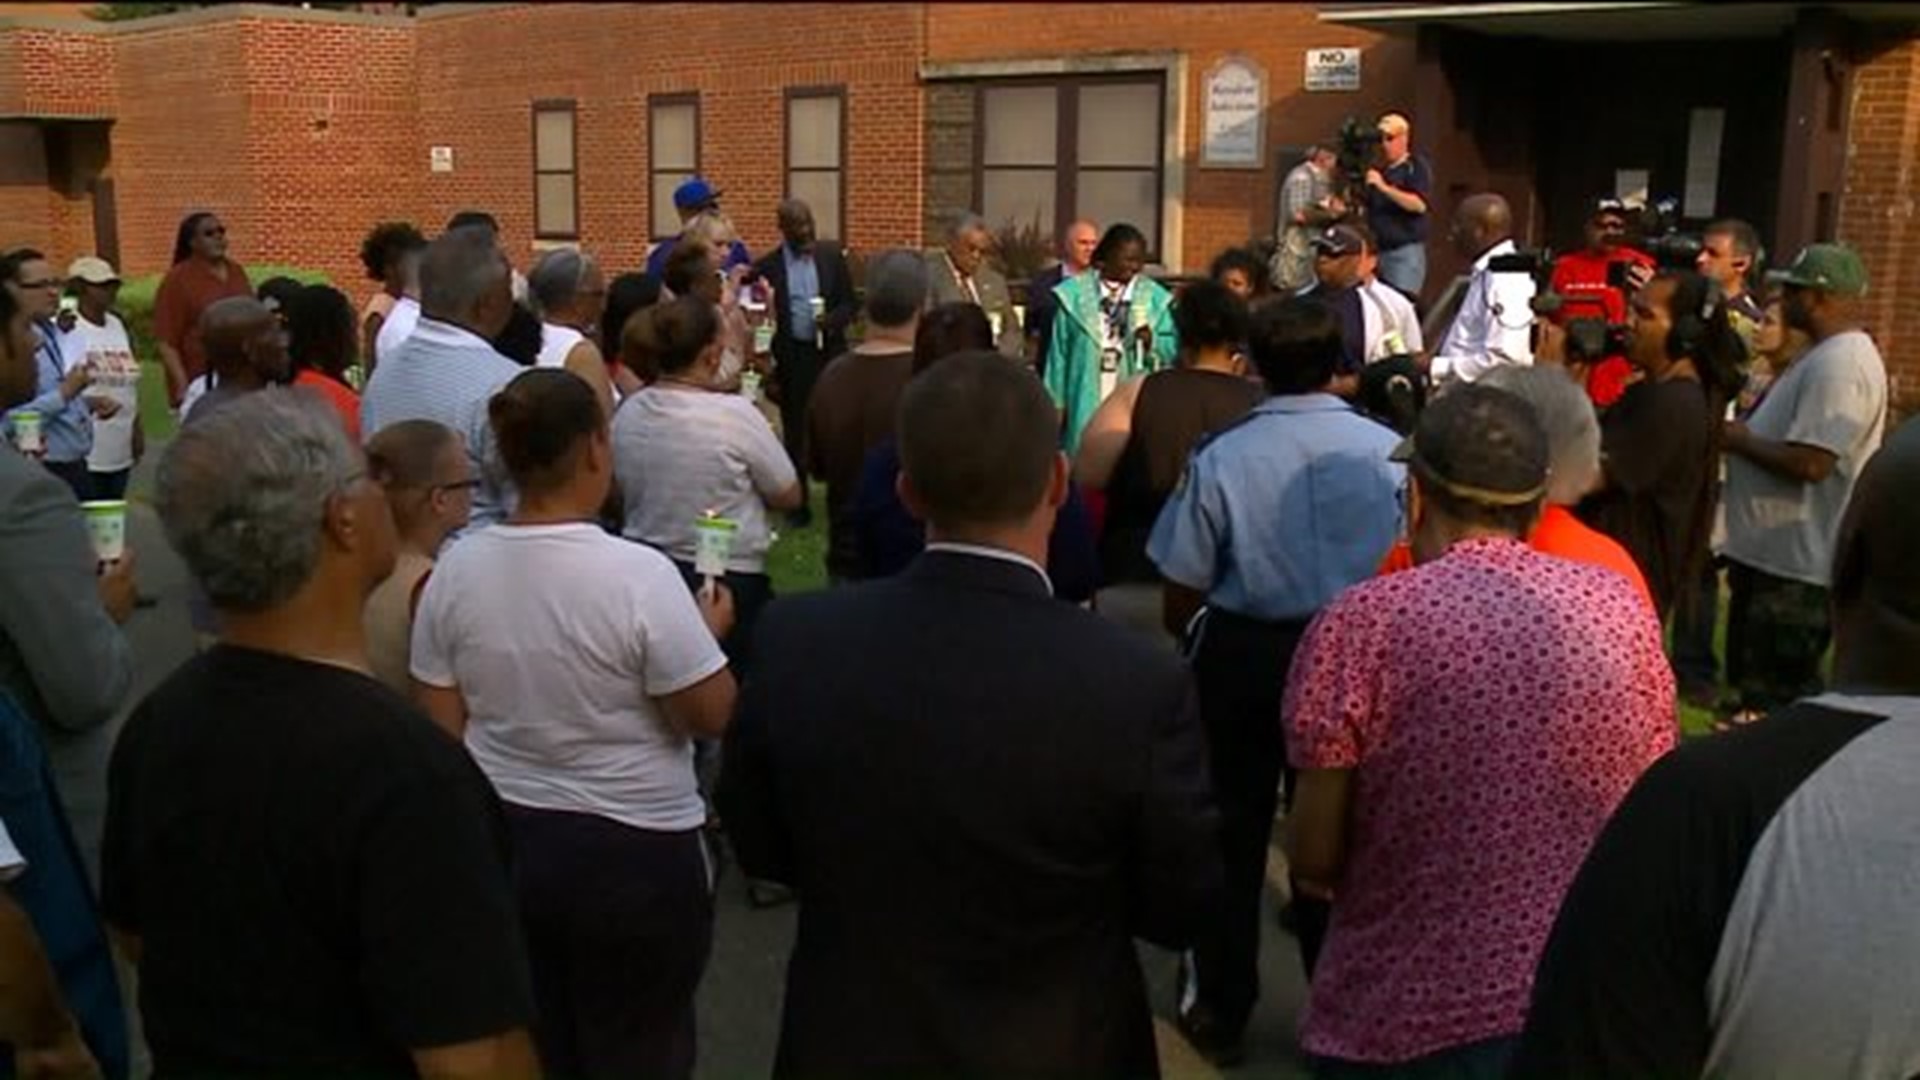 Community gathers to remember those hurt, killed in Bridgeport shooting